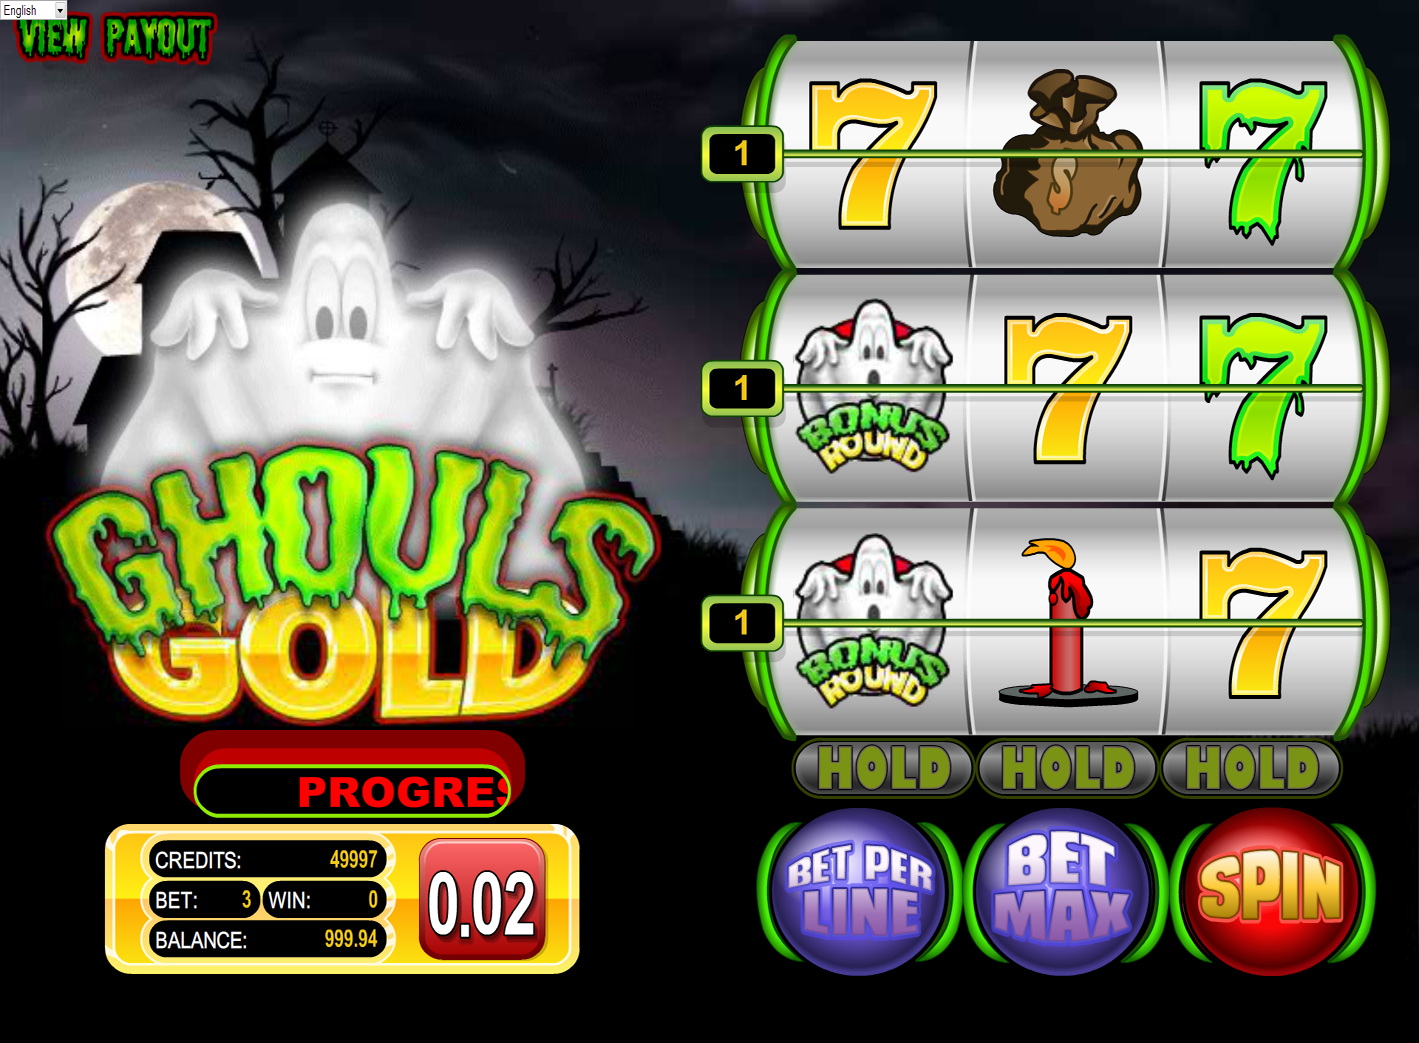 Ghouls Gold (Ghouls Gold) from category Slots